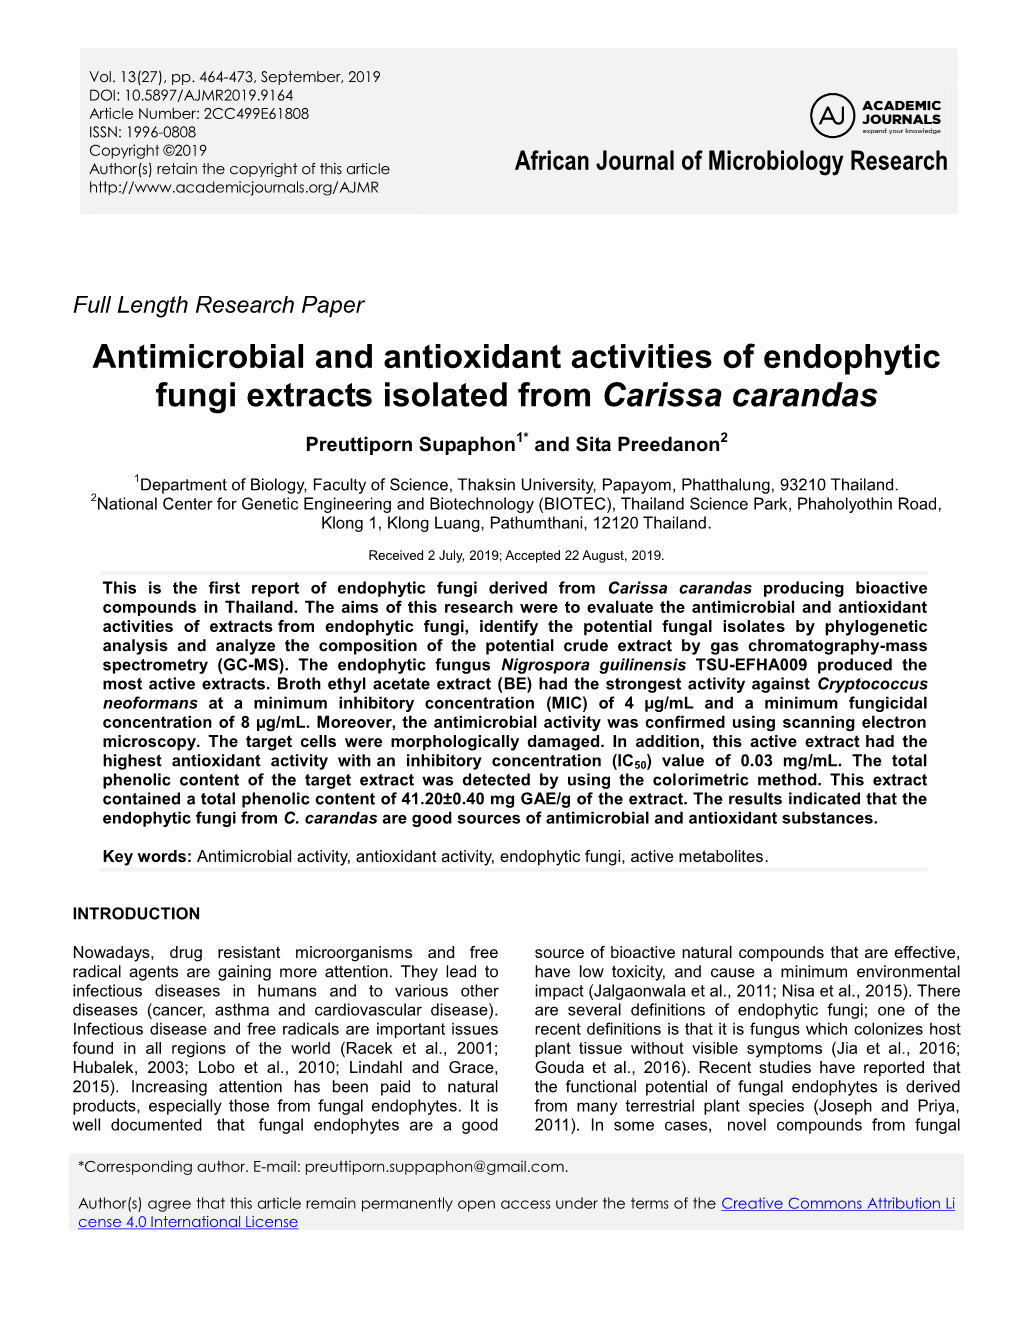 Antimicrobial and Antioxidant Activities of Endophytic Fungi Extracts Isolated from Carissa Carandas